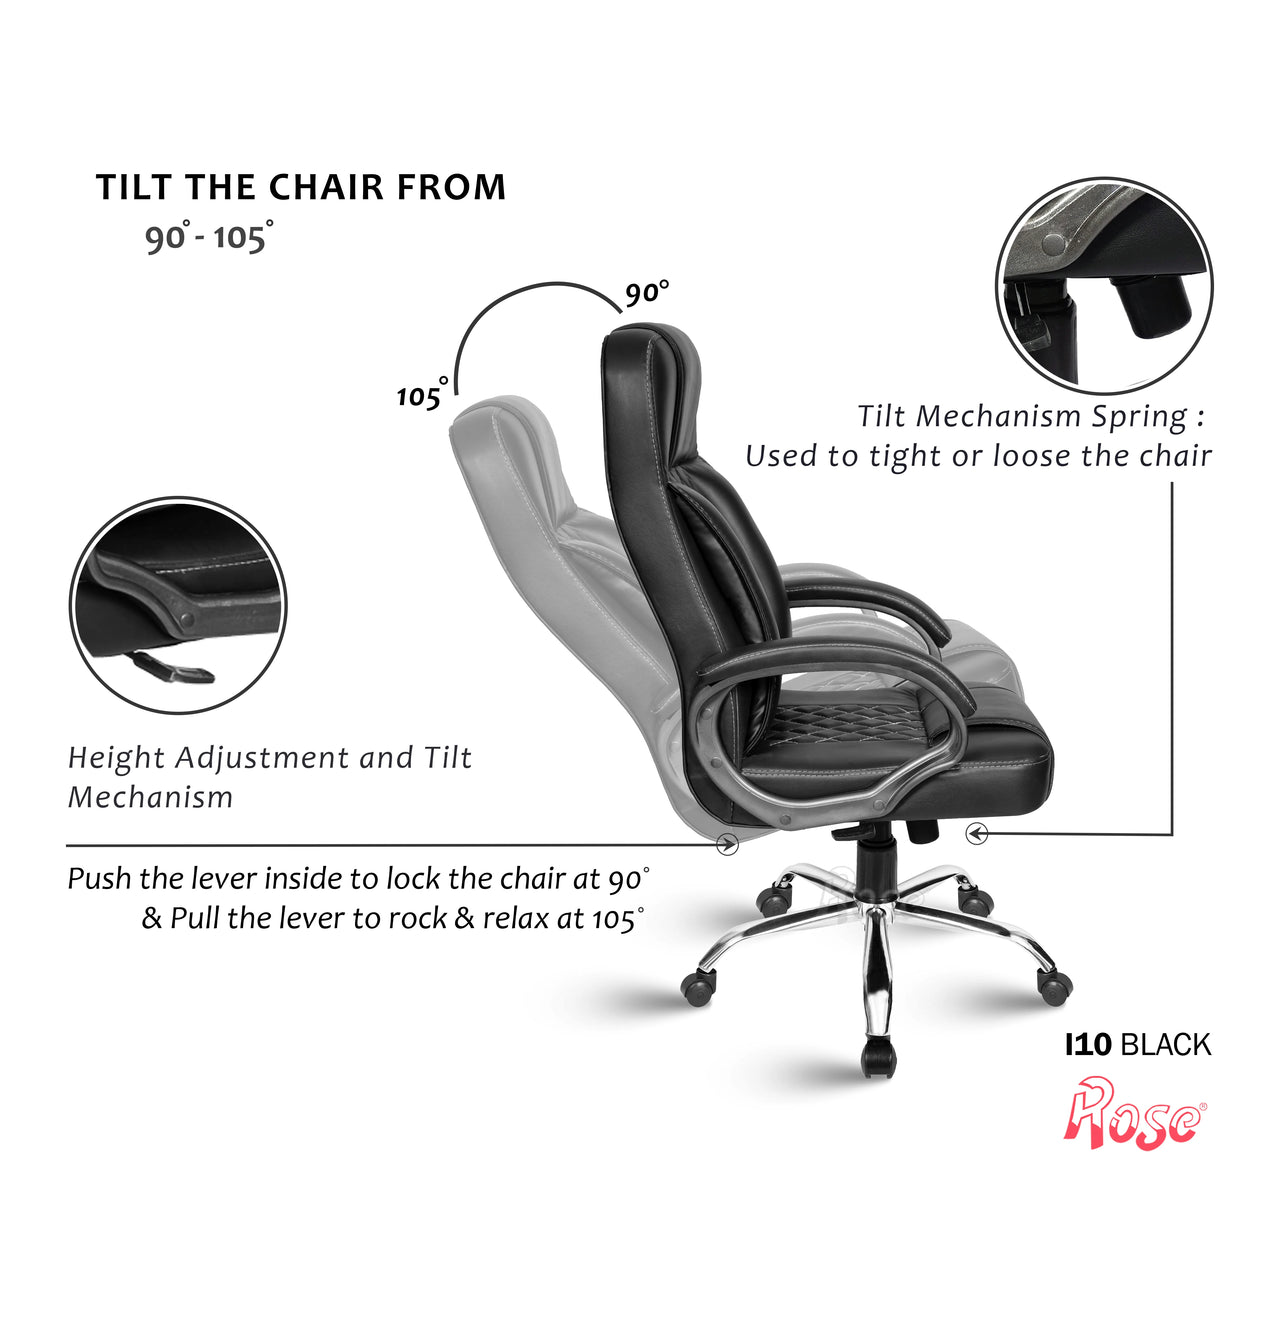 I10 Leatherette Executive High Back Revolving Office Chair (Black)